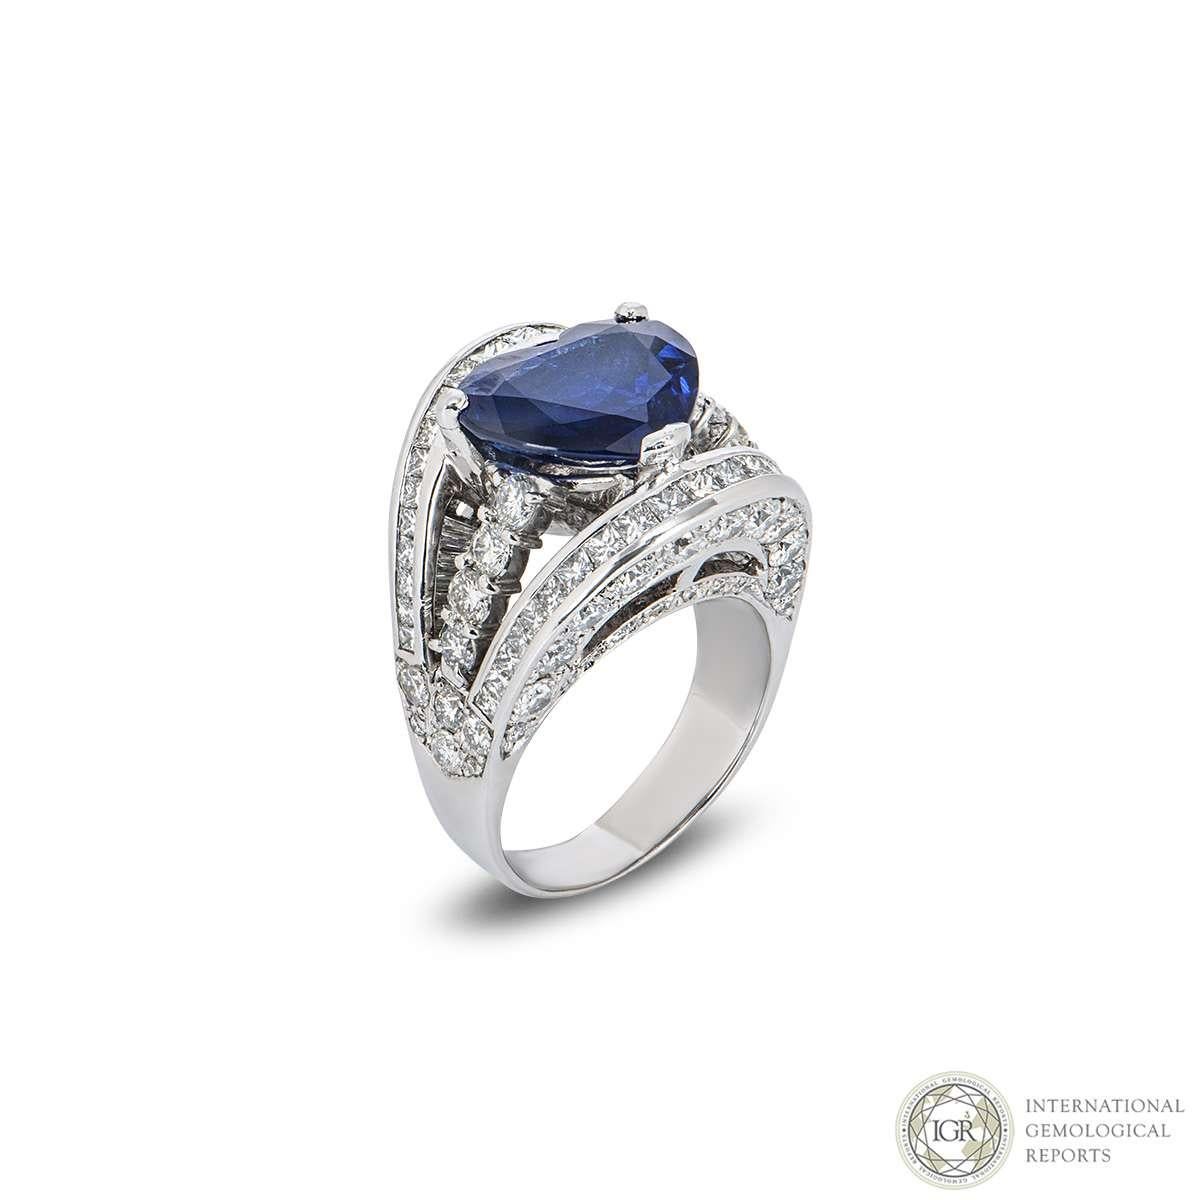 A statement 18k white gold diamond and sapphire dress ring. The ring comprises of a heart cut sapphire weighing 7.66ct, with a strong violetish blue hue throughout, type II VVS clarity. The sapphire is set between 3 bands which are diamond set with